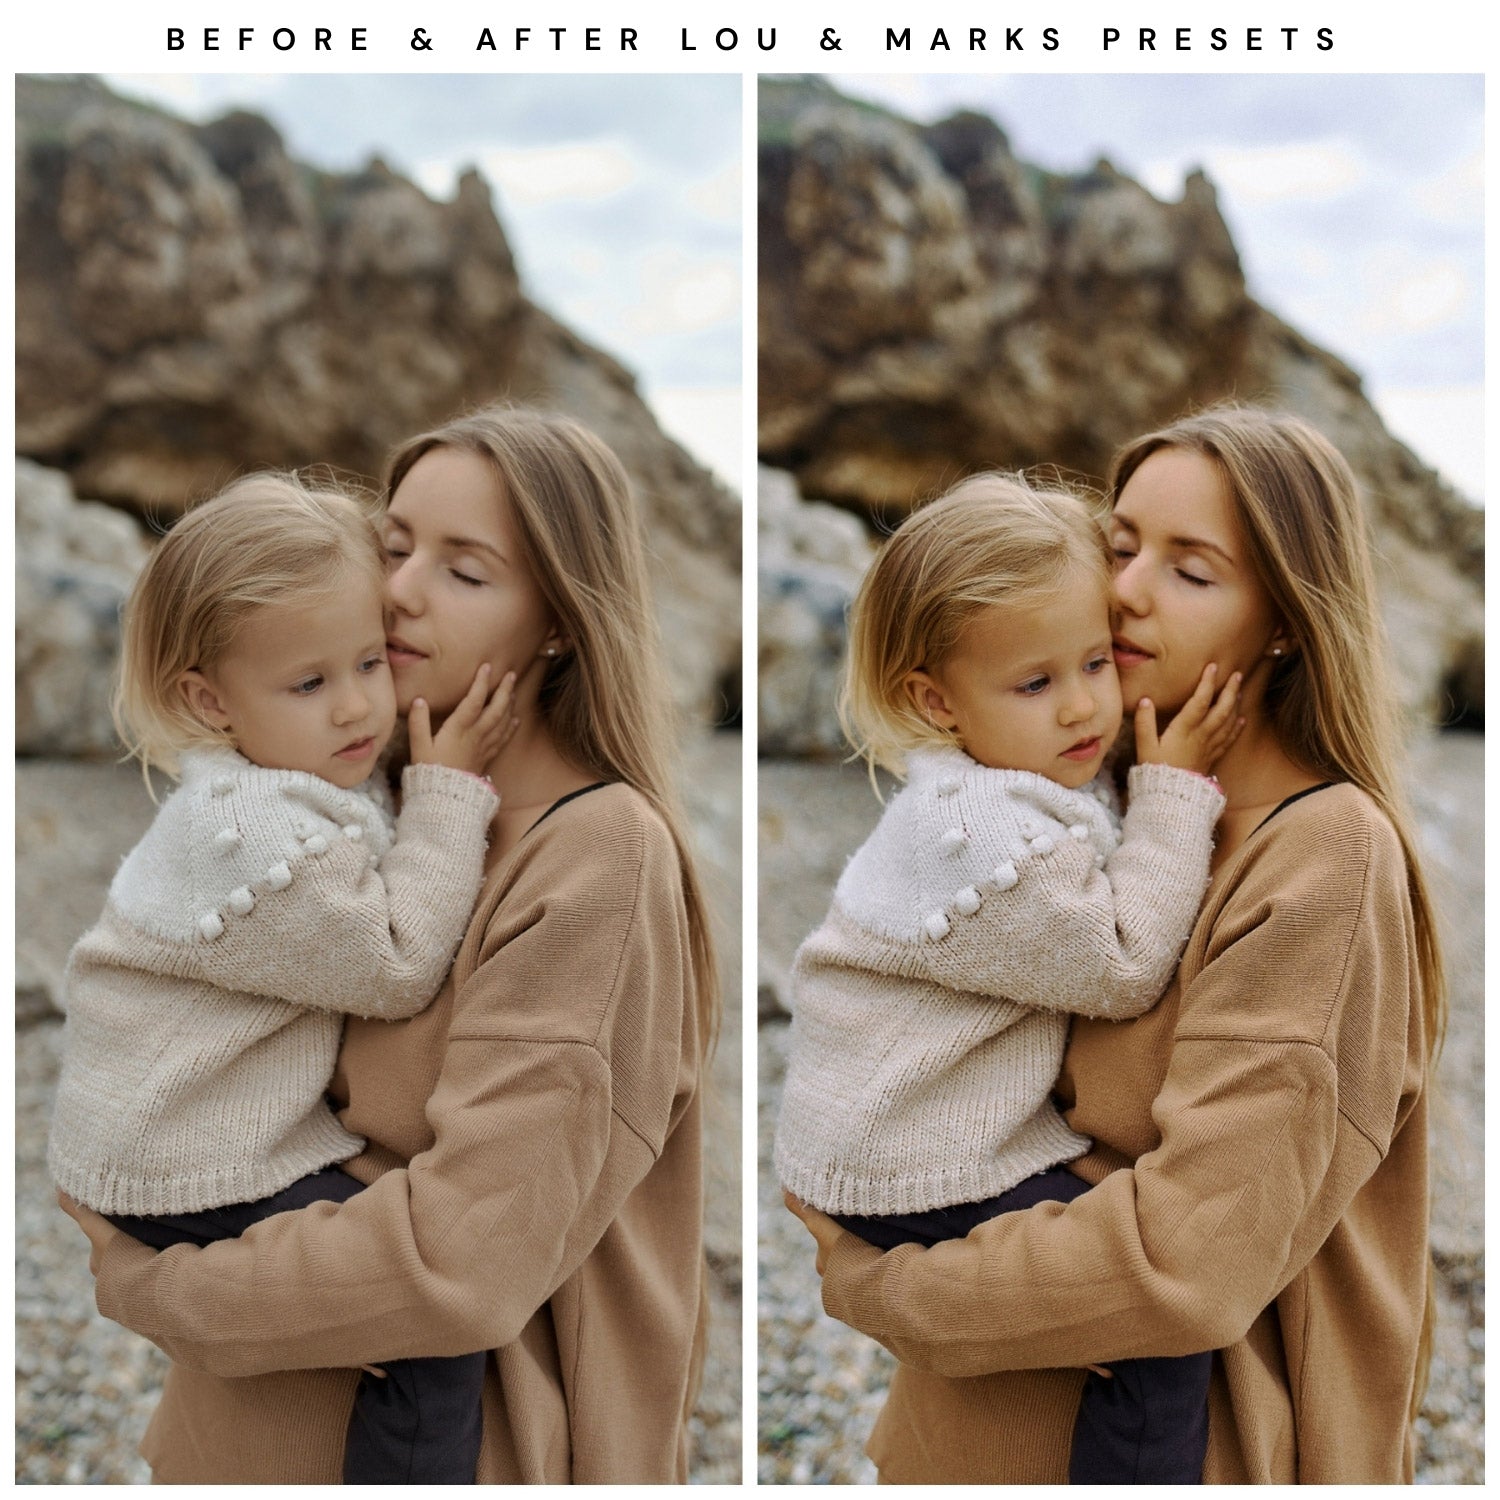 Lou And Marks Presets Moody Lightroom Presets Bundle The Best Moody Presets Family Session